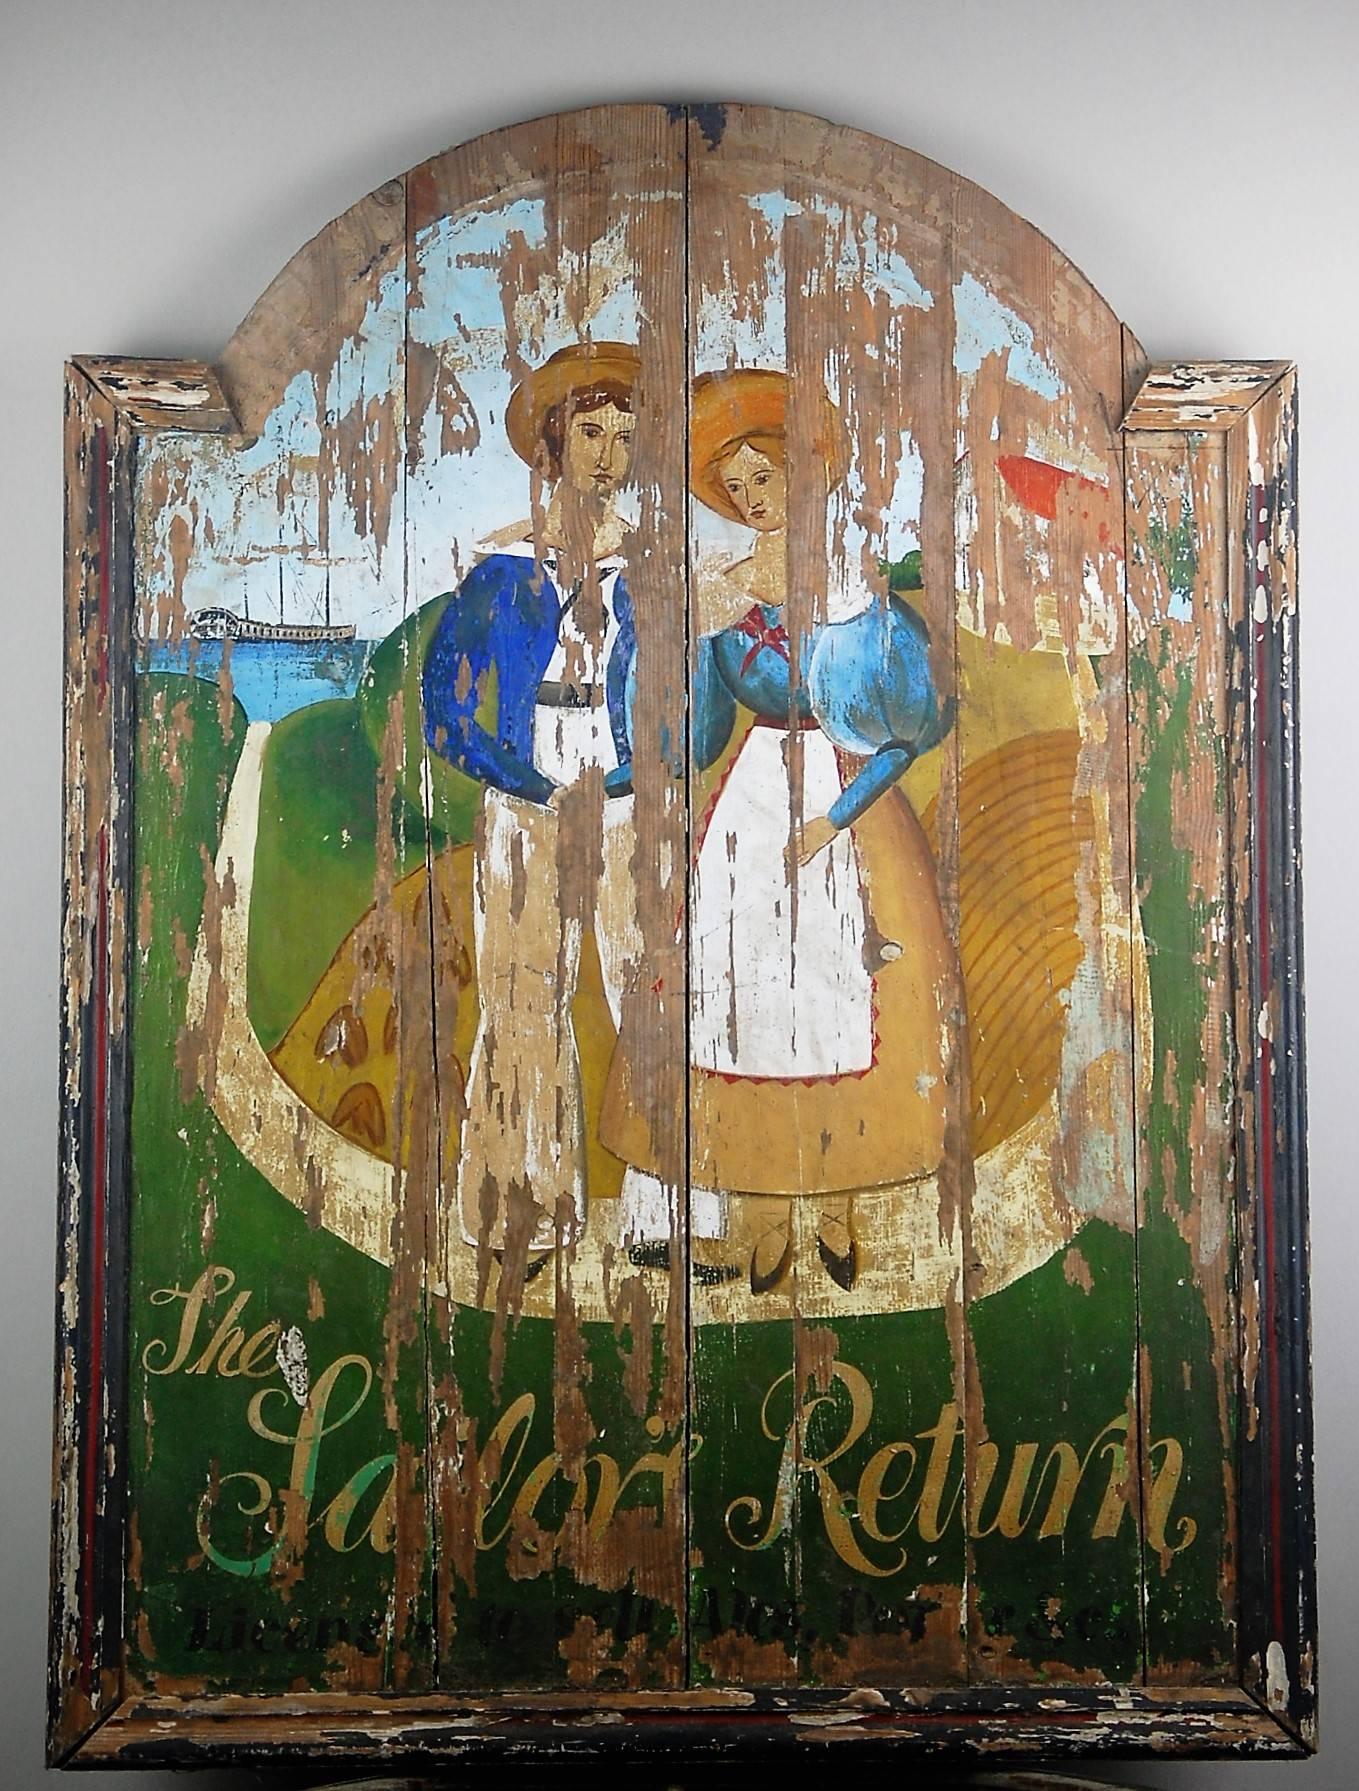 The Sailors Return naive Folk Art tavern sign, hand-painted on wood boards, heavily weathered and distressed. Cornwall, England, circa 1890.